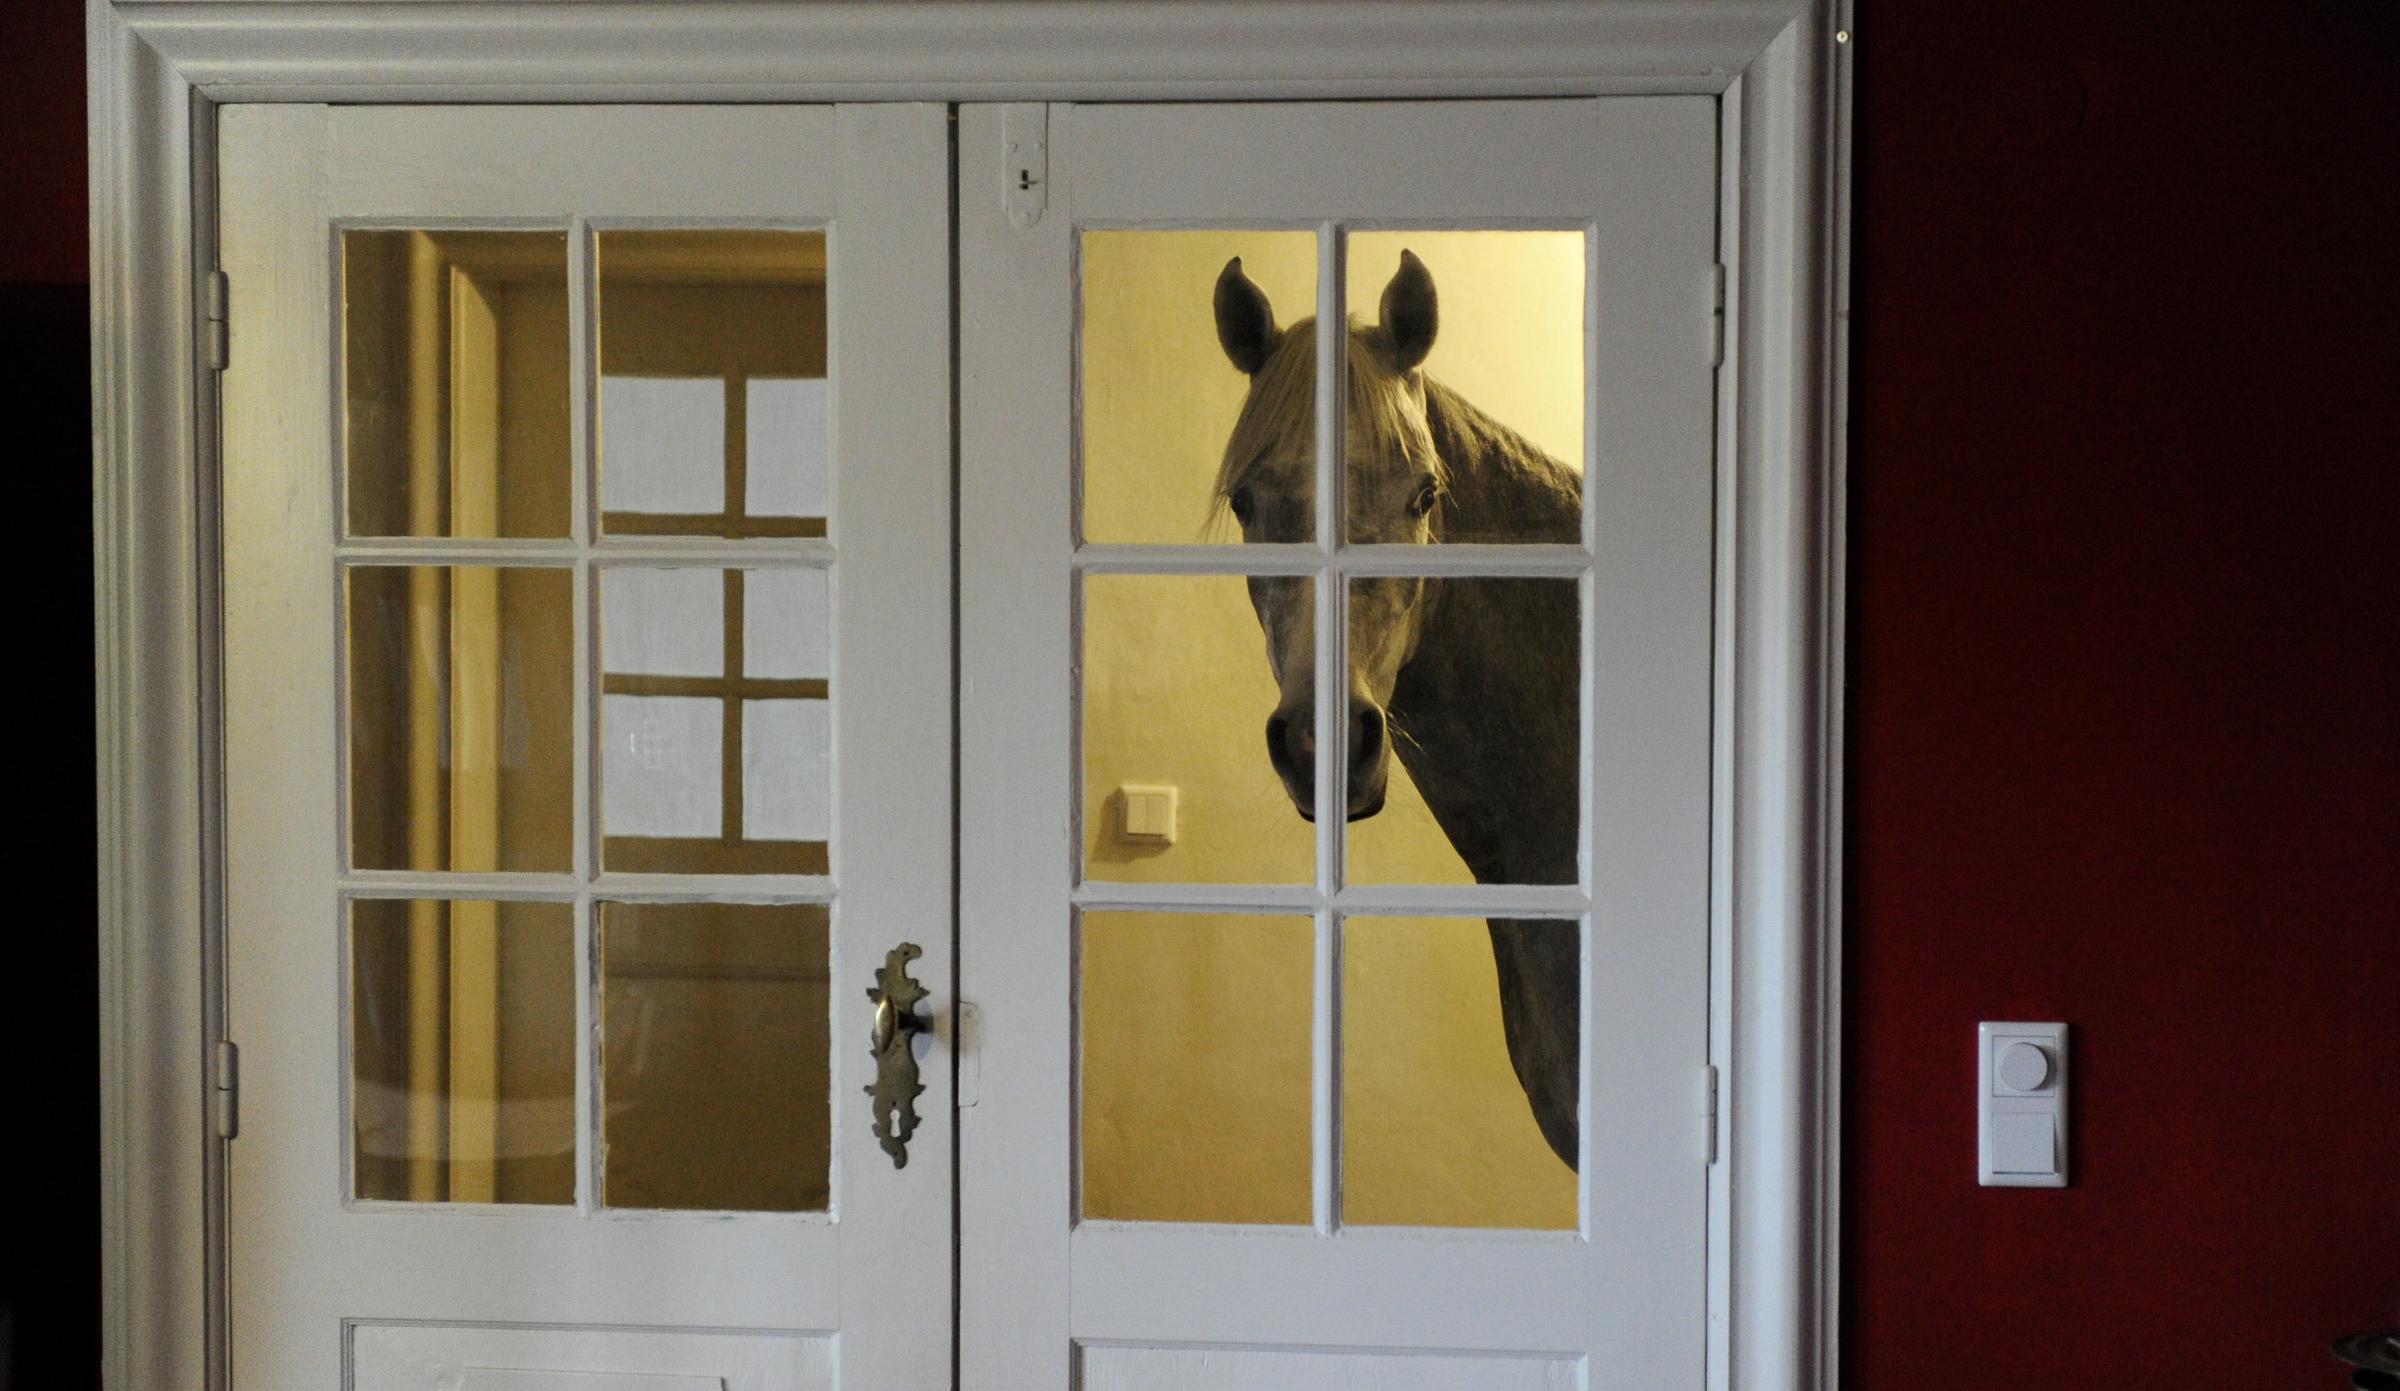 Three-year-old Arabian horse Nasar stands in front of the living room door, Feb. 10, 2014. After a powerful storm swept through northern Germany in December, Stephanie Arndt brought her horse Nasar inside. Since then, the horse has grown very comfortable and stays indoors.